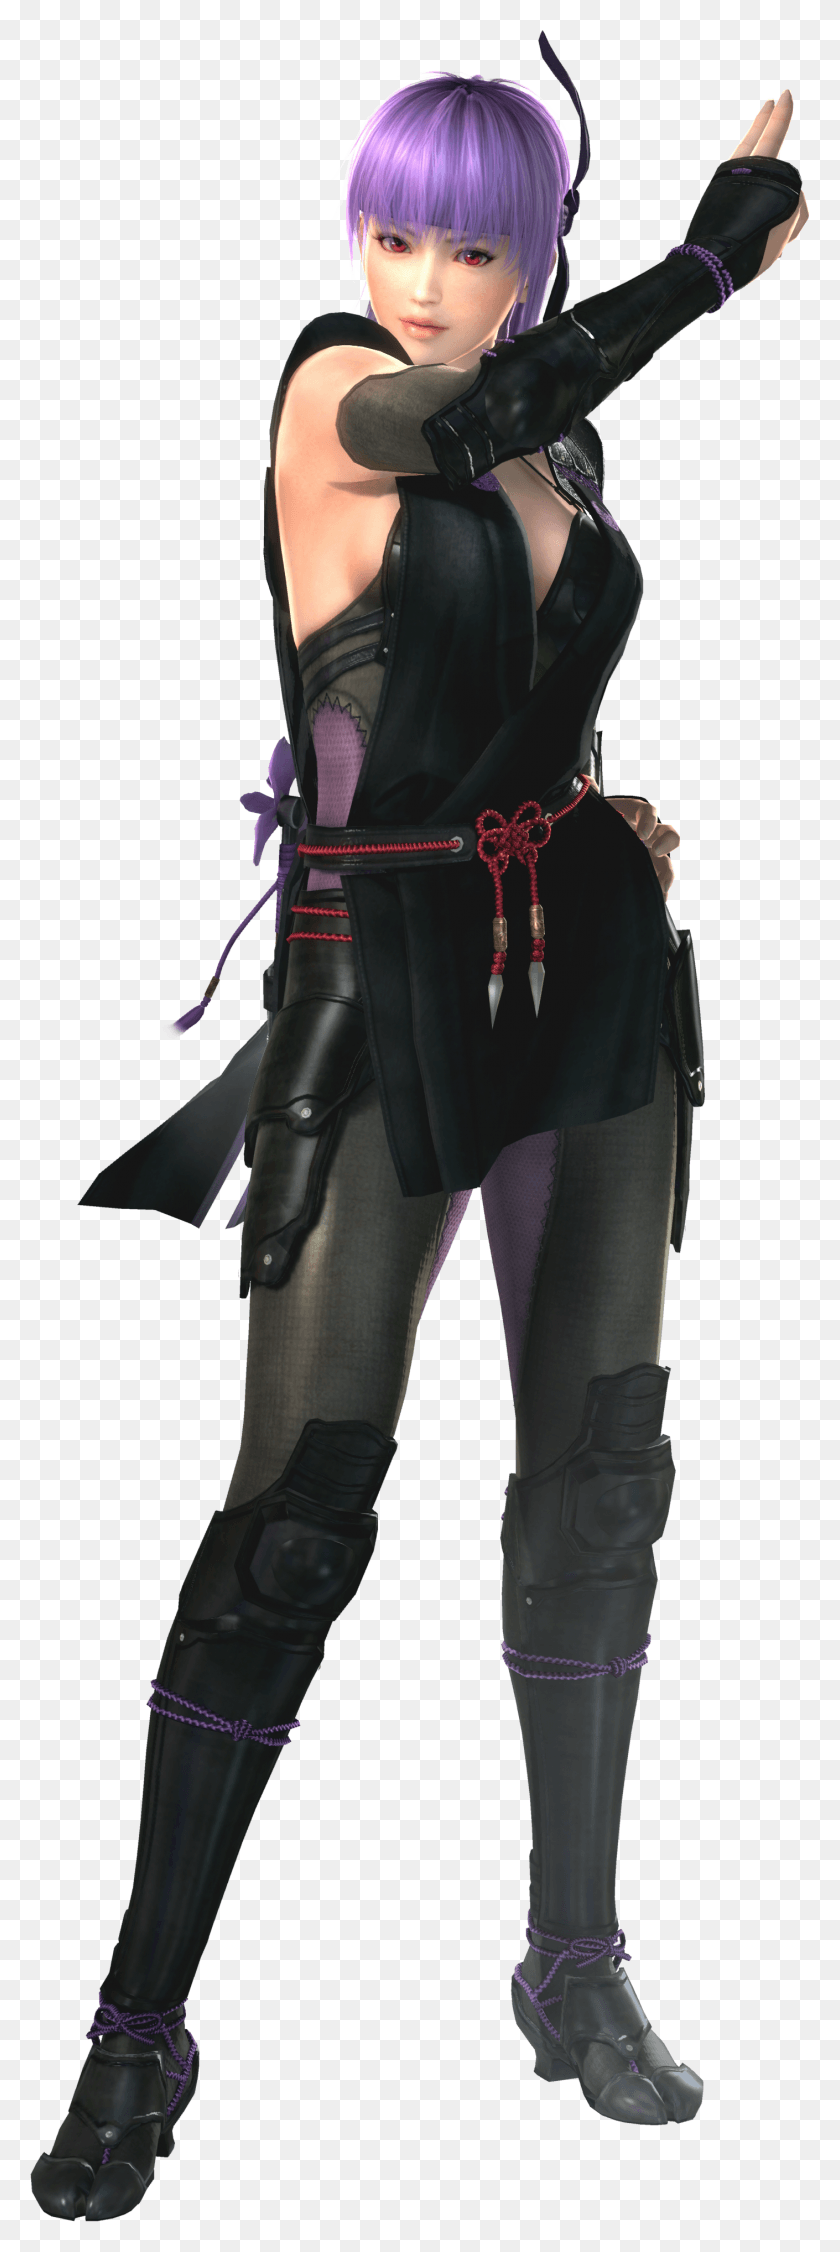 1410x3964 Descargar Png / Dead Or Alive 5 Ayane, Ropa, Ropa, Persona Hd Png